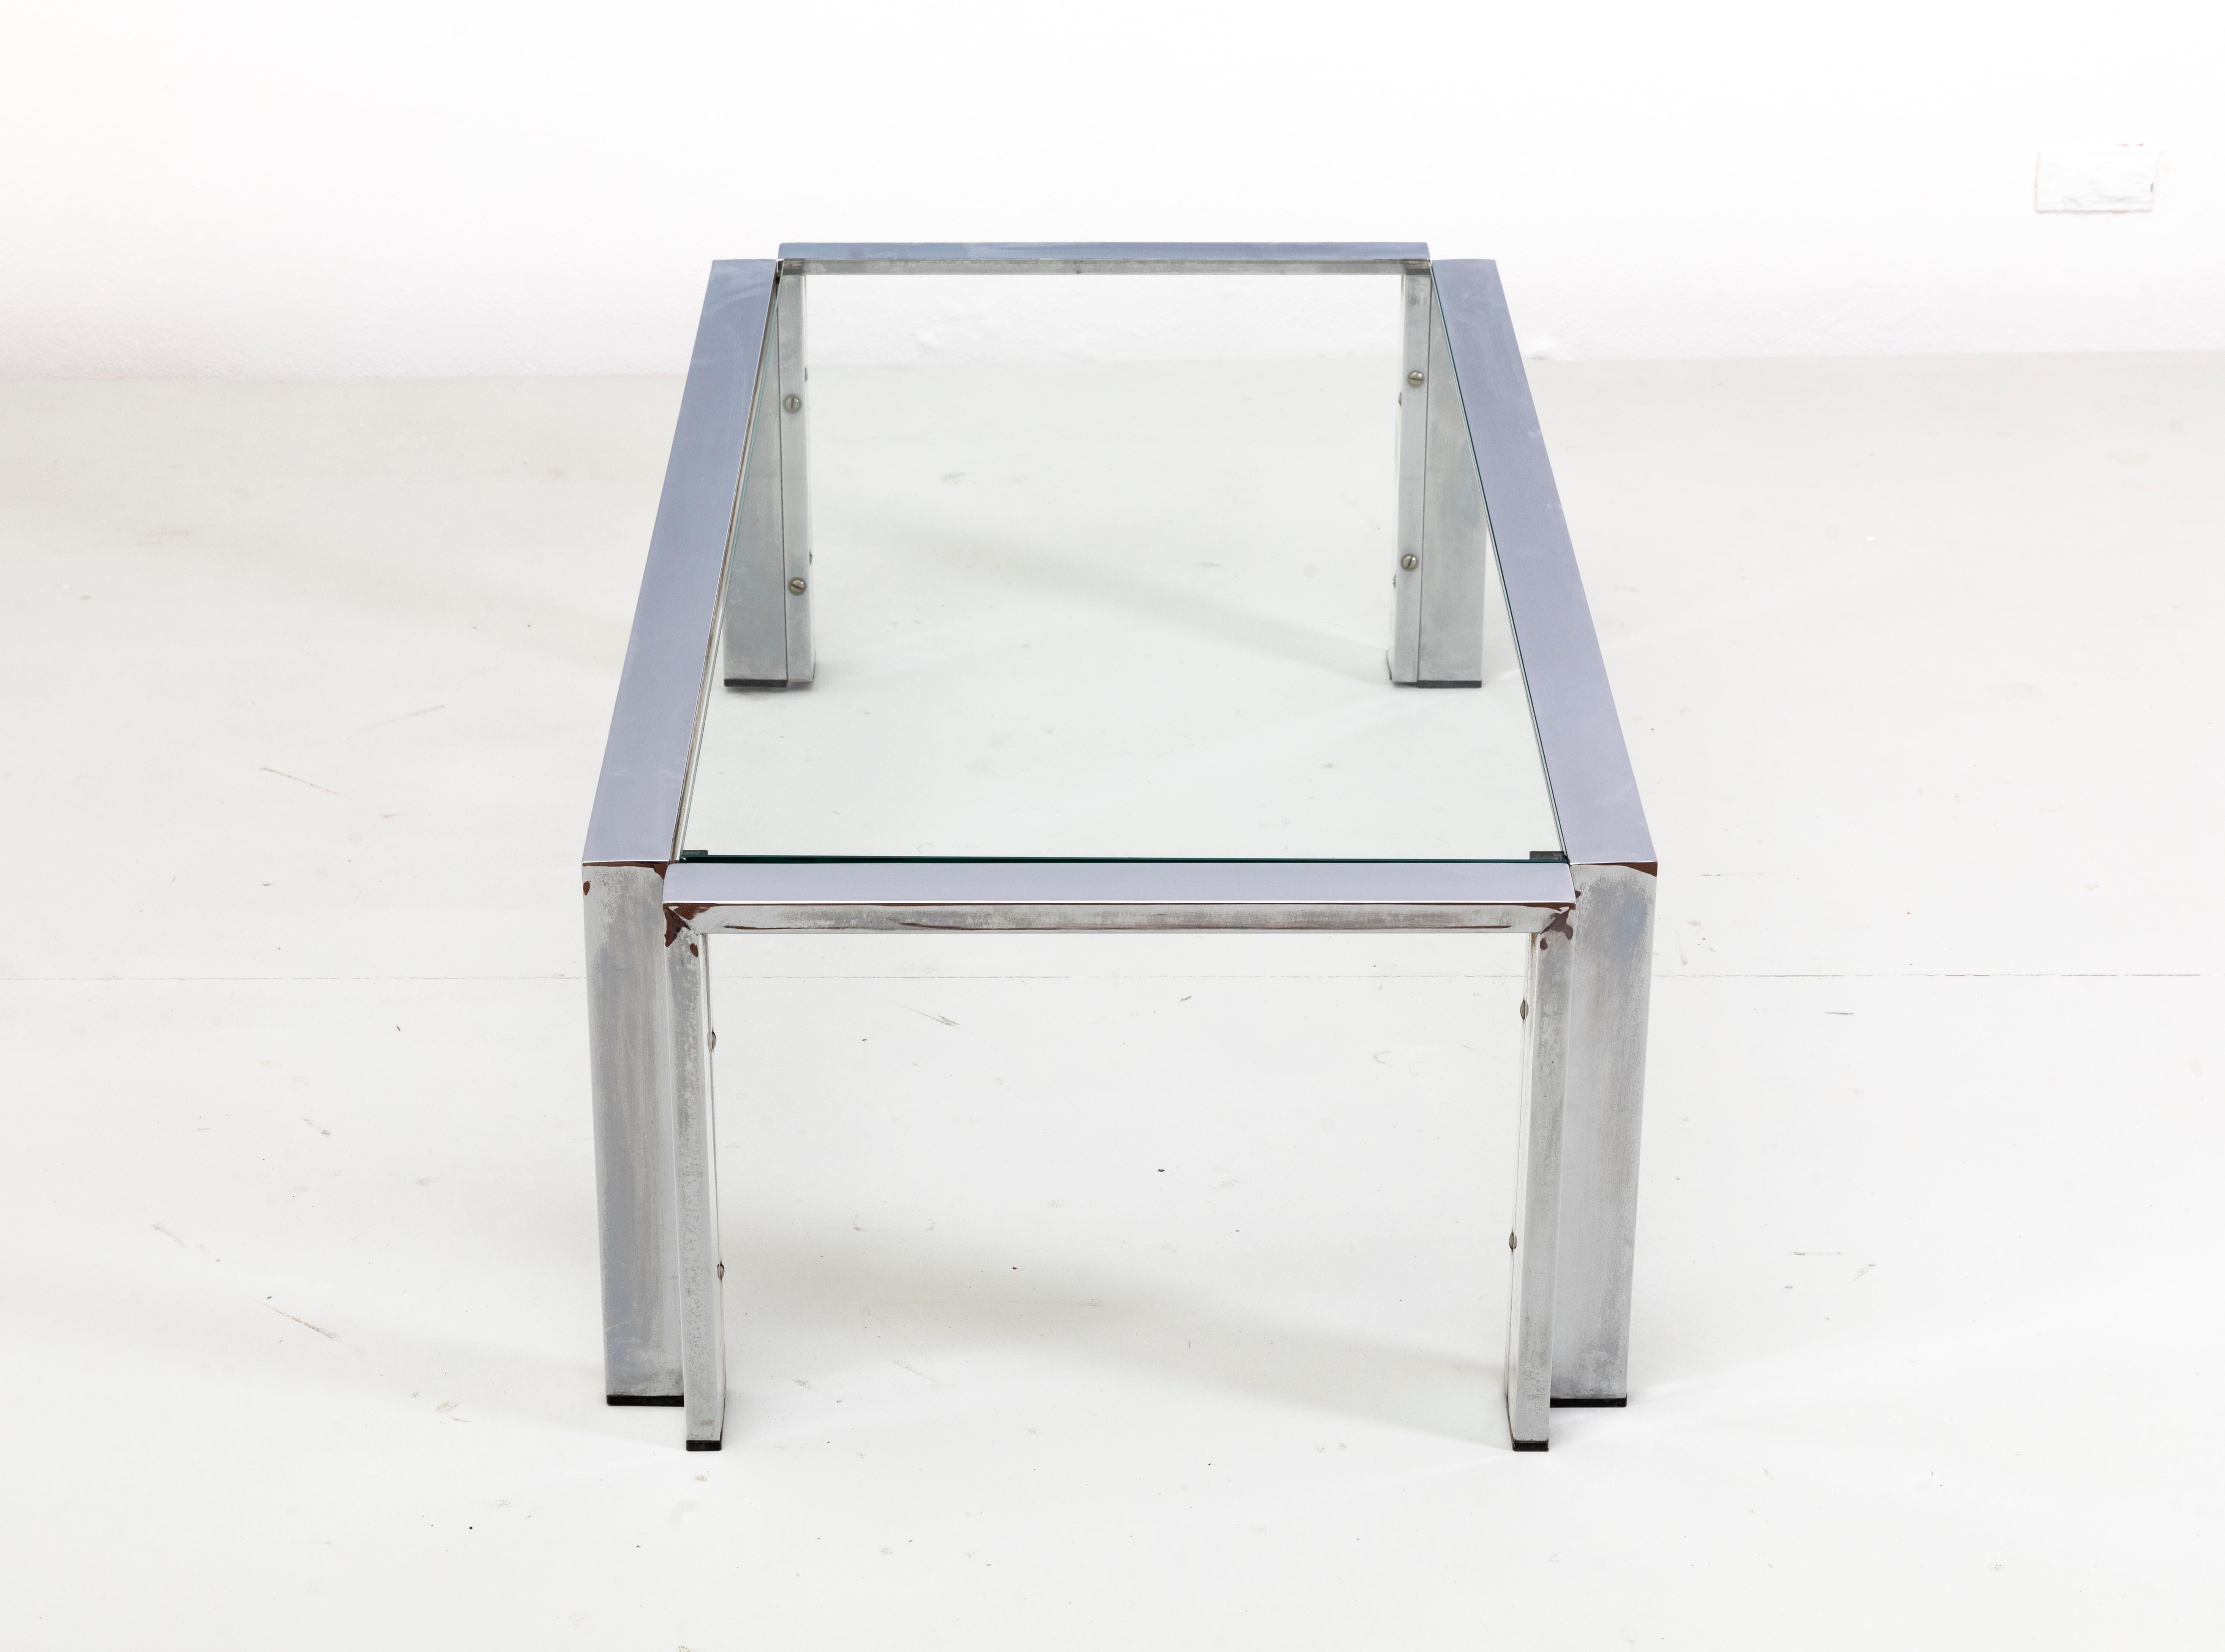 Romeo Rega Prod. Italy, C. 1970 Glass Table with Steel Frame and Edges For Sale 5